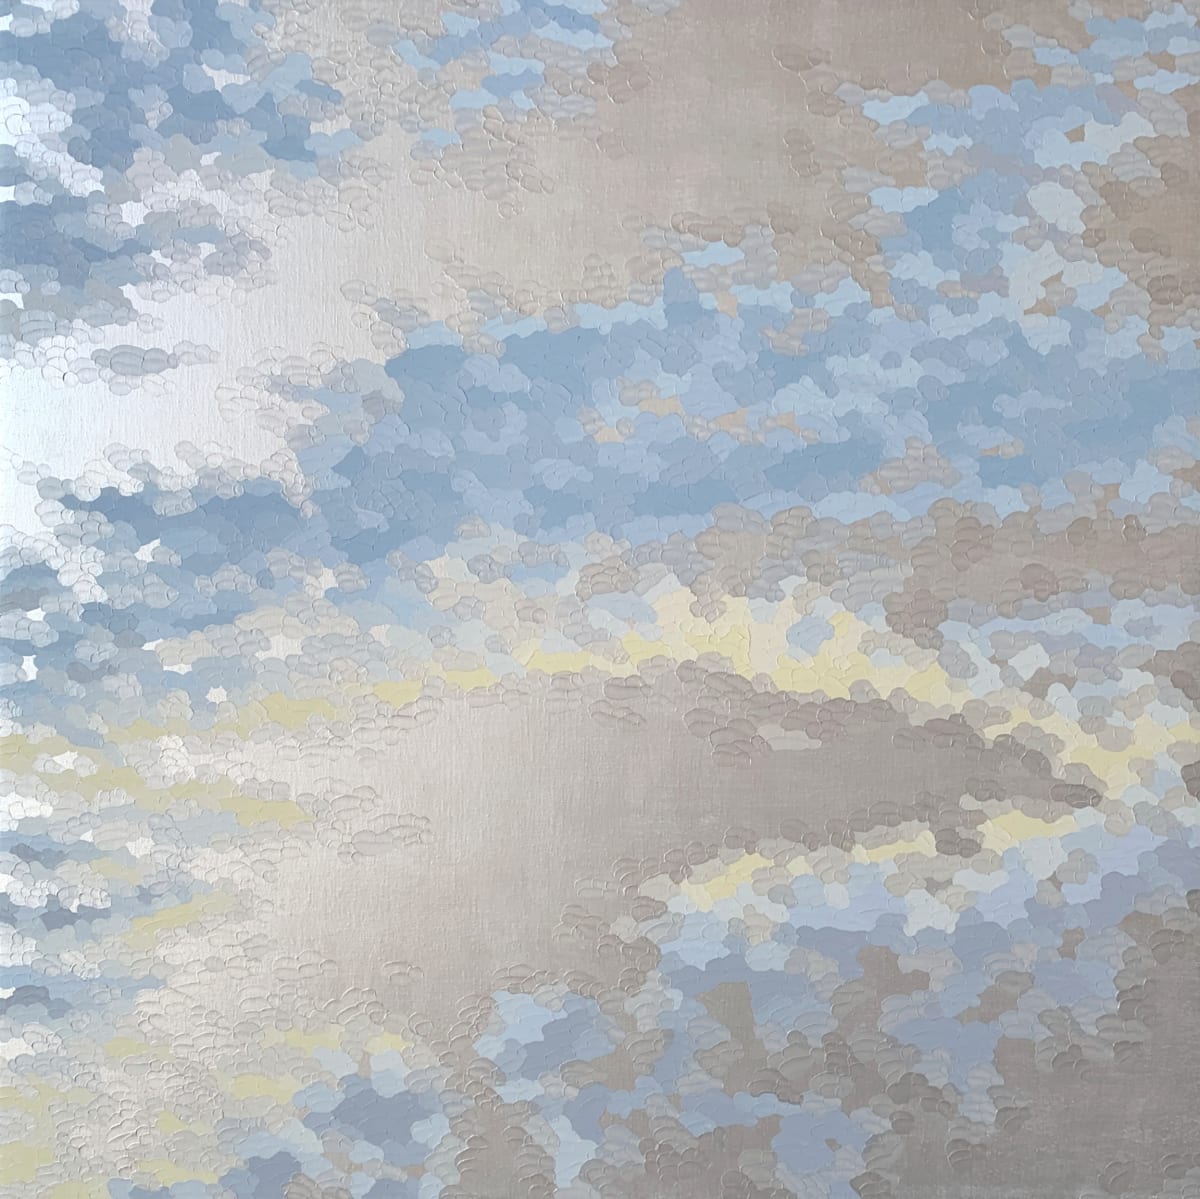 Cloud Sparkle 3 (pearl) by Elaine Coombs 